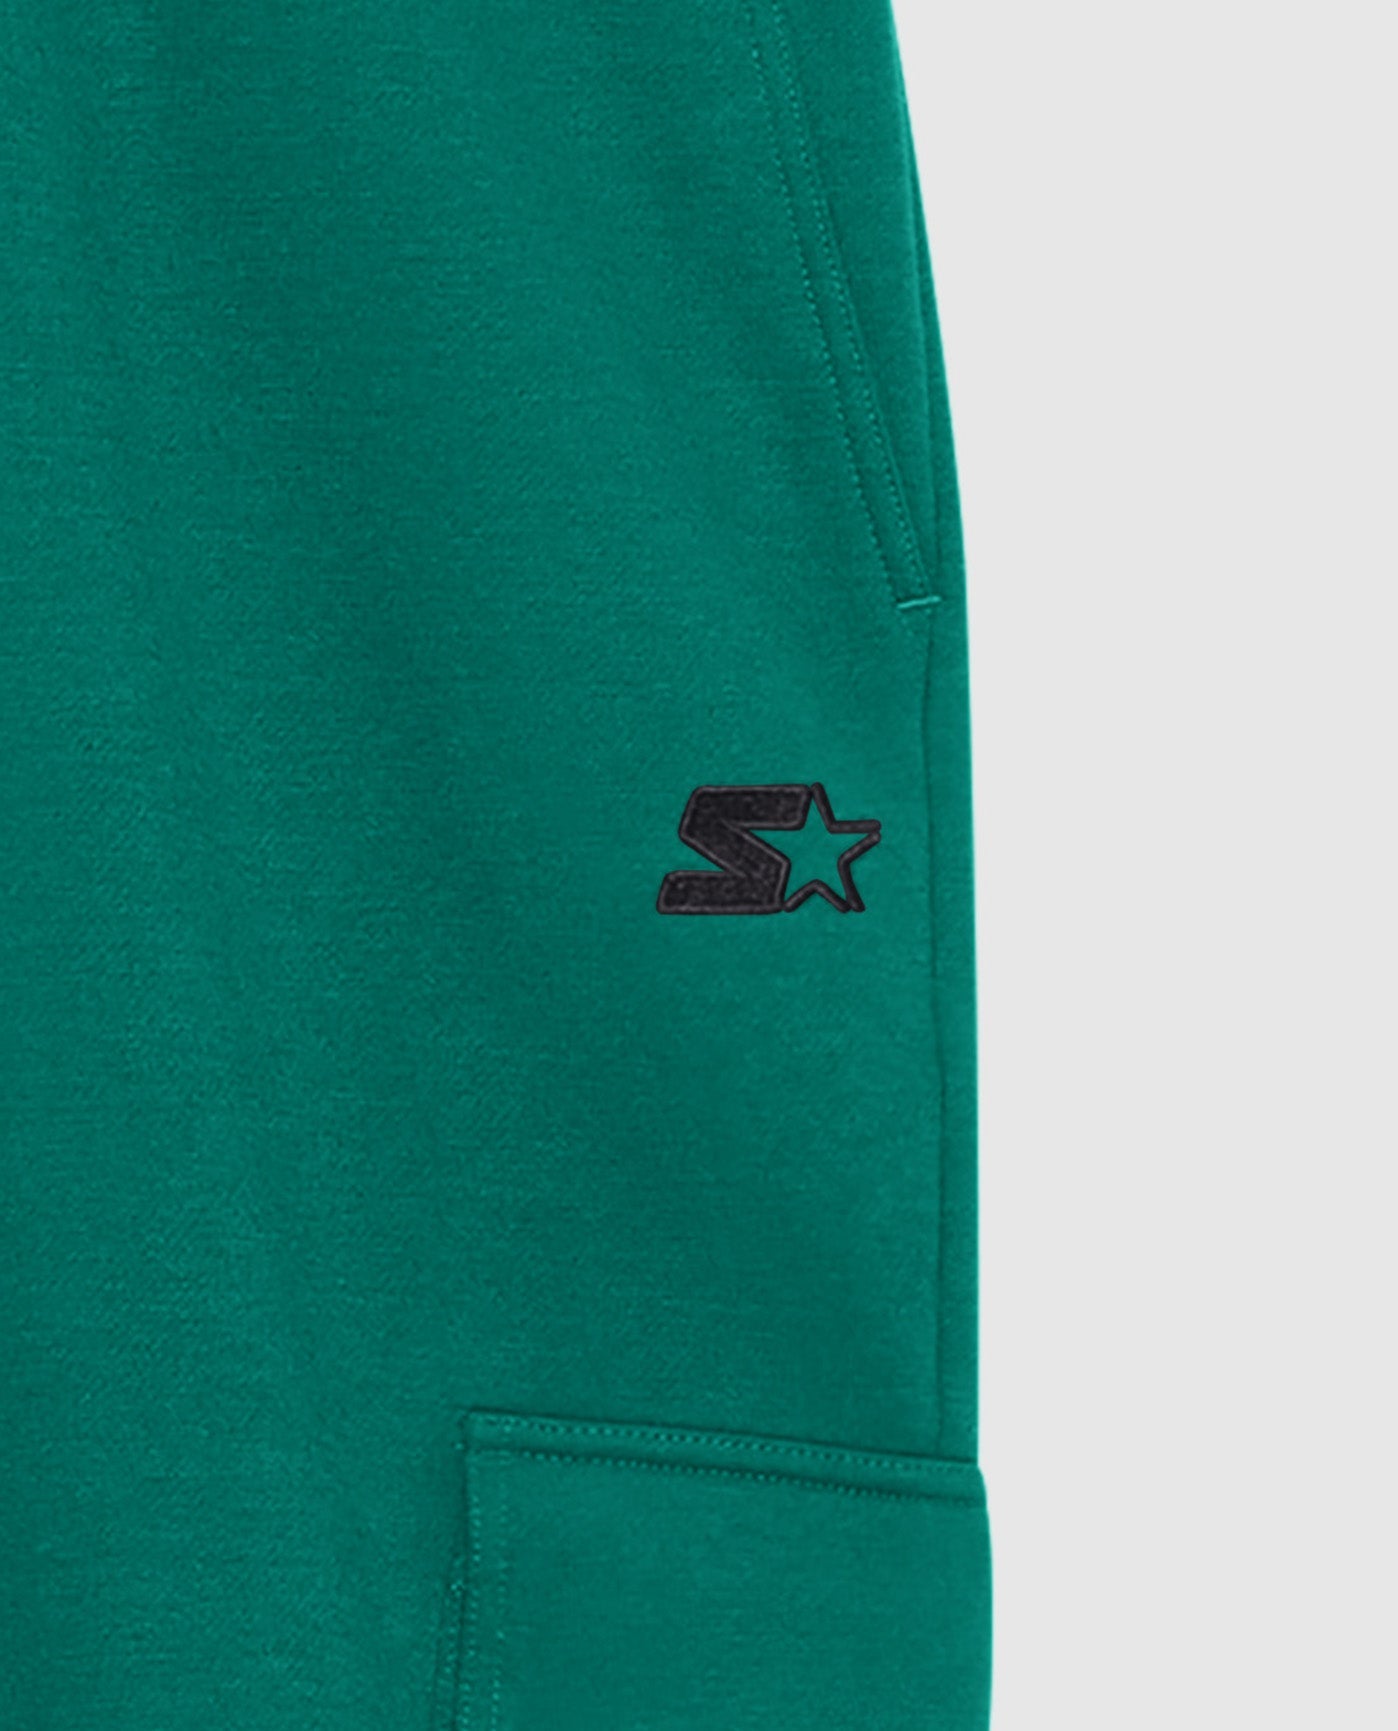 Embroidered Starter Logo on Starter Kyle Jogger with Cargo Pockets Green | Green